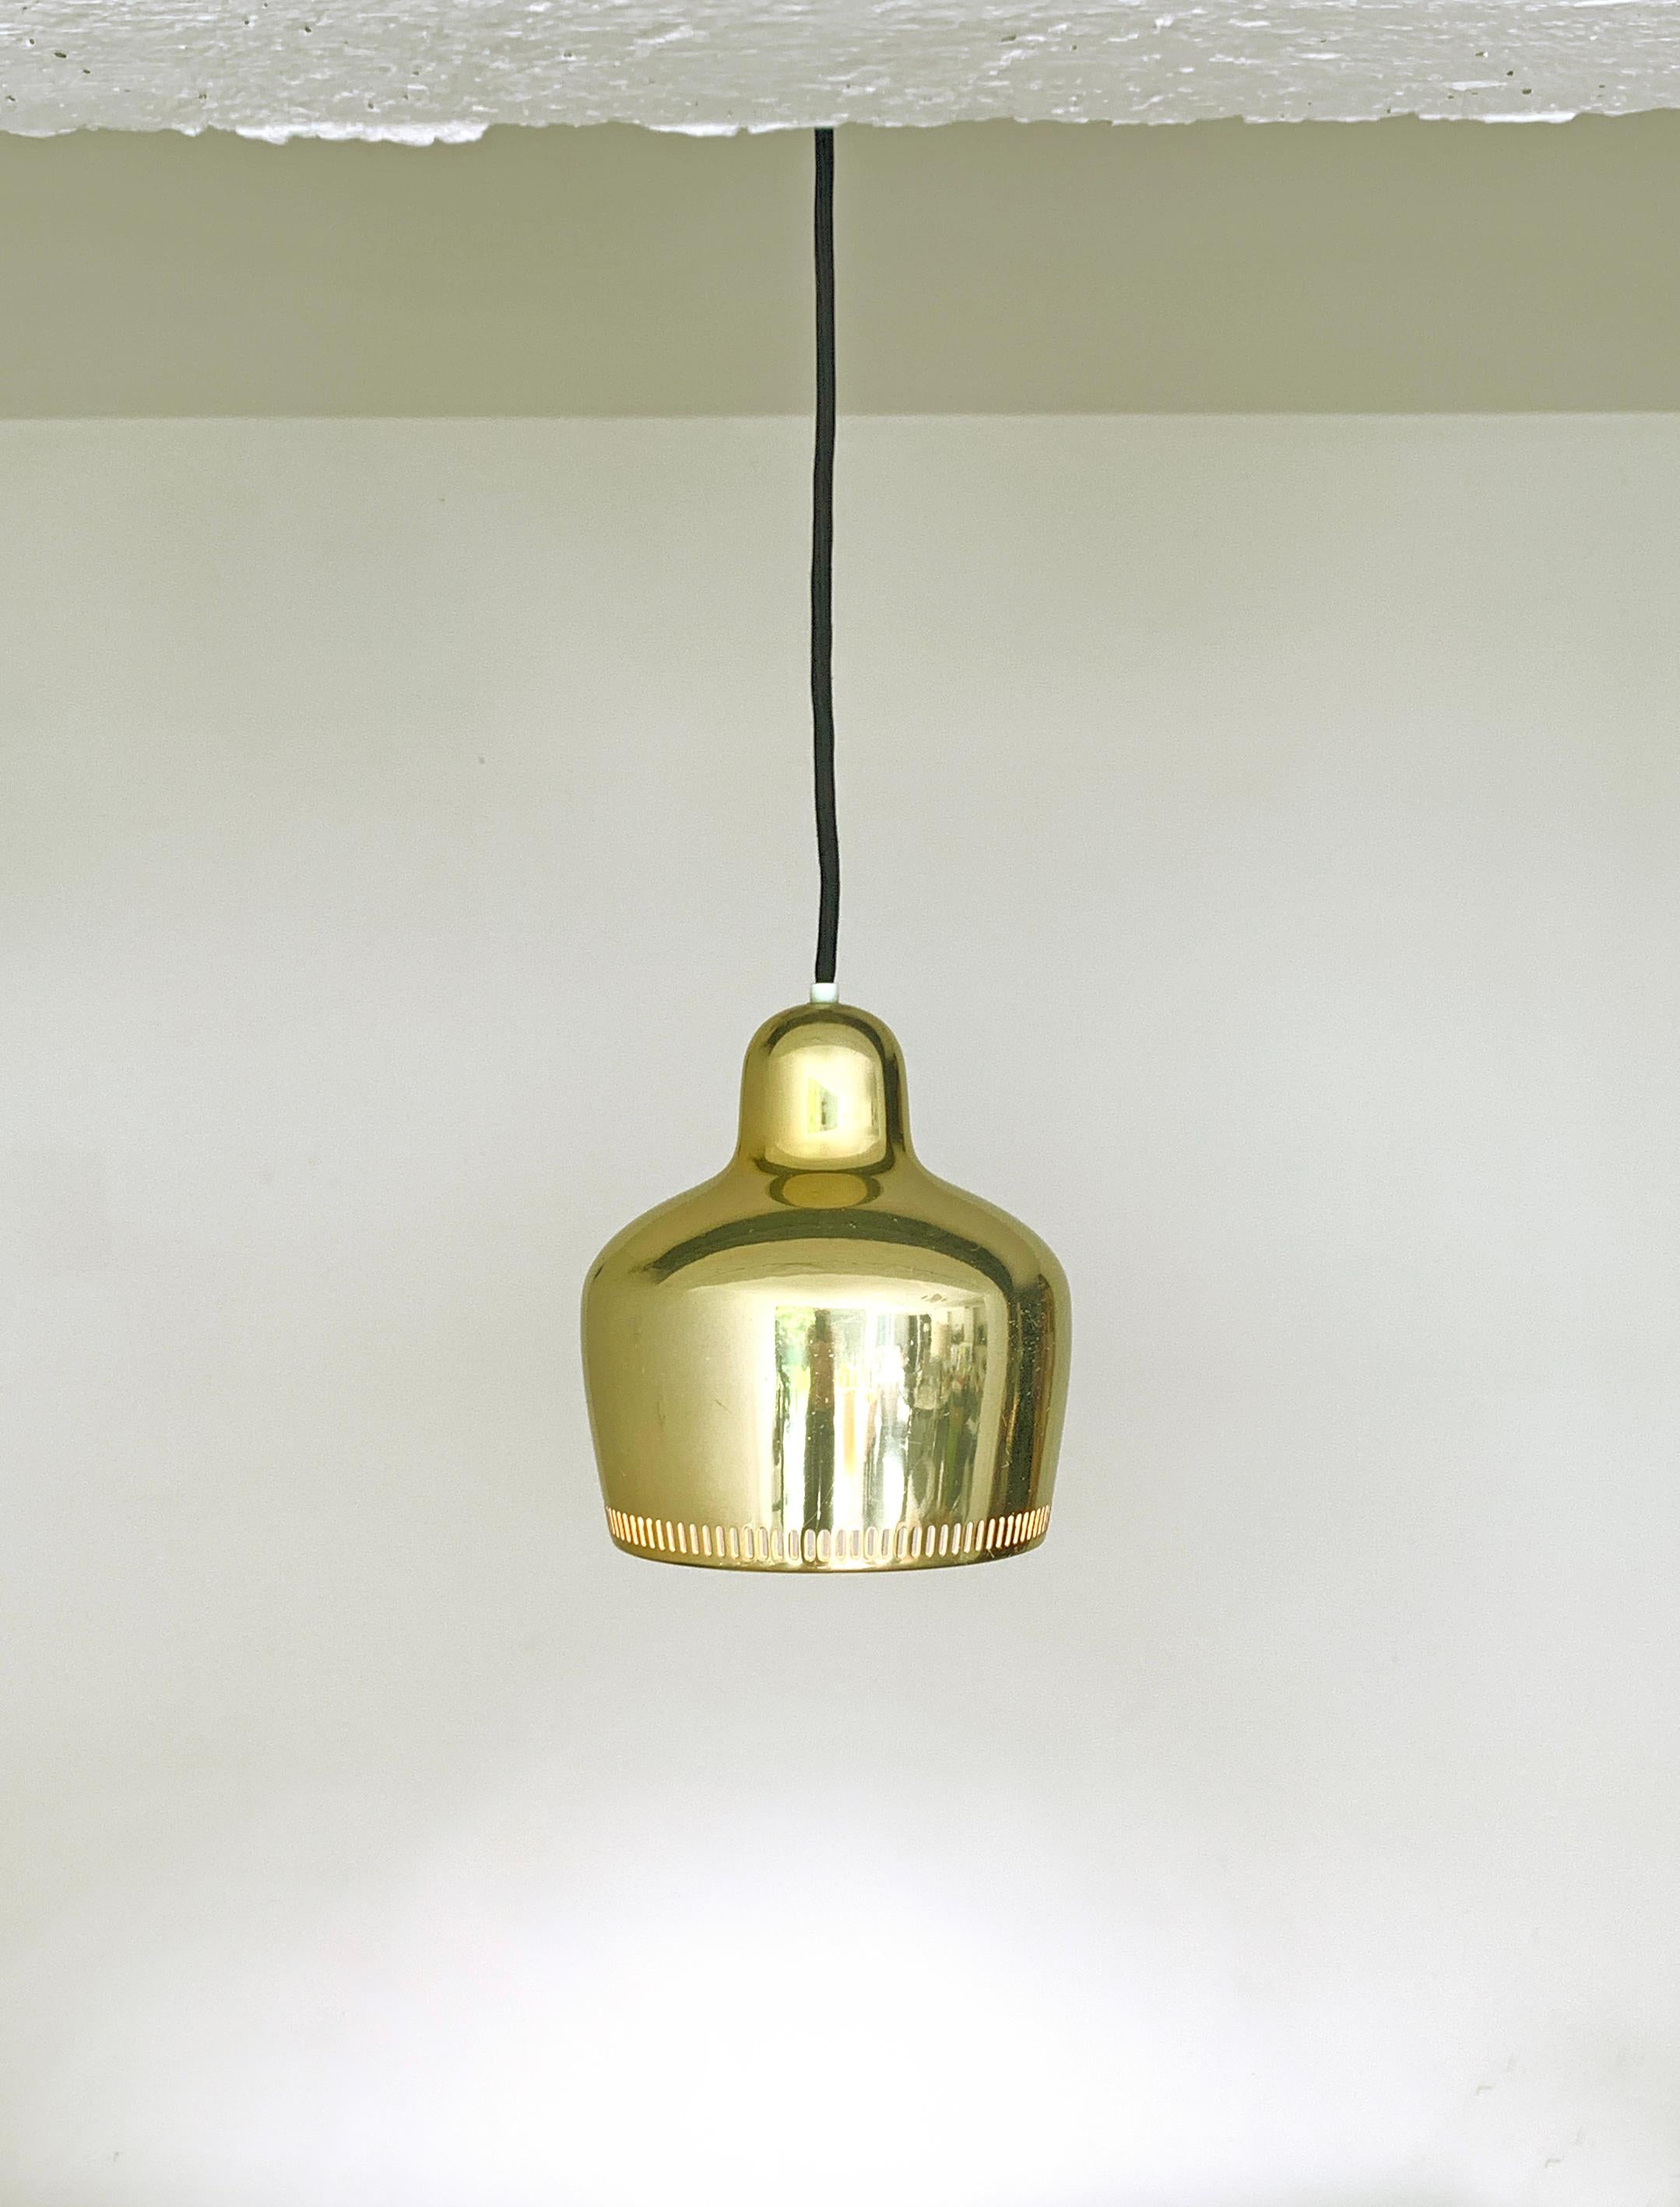 The 'Golden Bell' pendant lamp was designed in 1936 for the interior of the Savoy restaurant in Helsinki by Alvar and his wife Aino Aalto. It was characteristic of Aalto to treat each building as a complete work of art, right down to the furniture